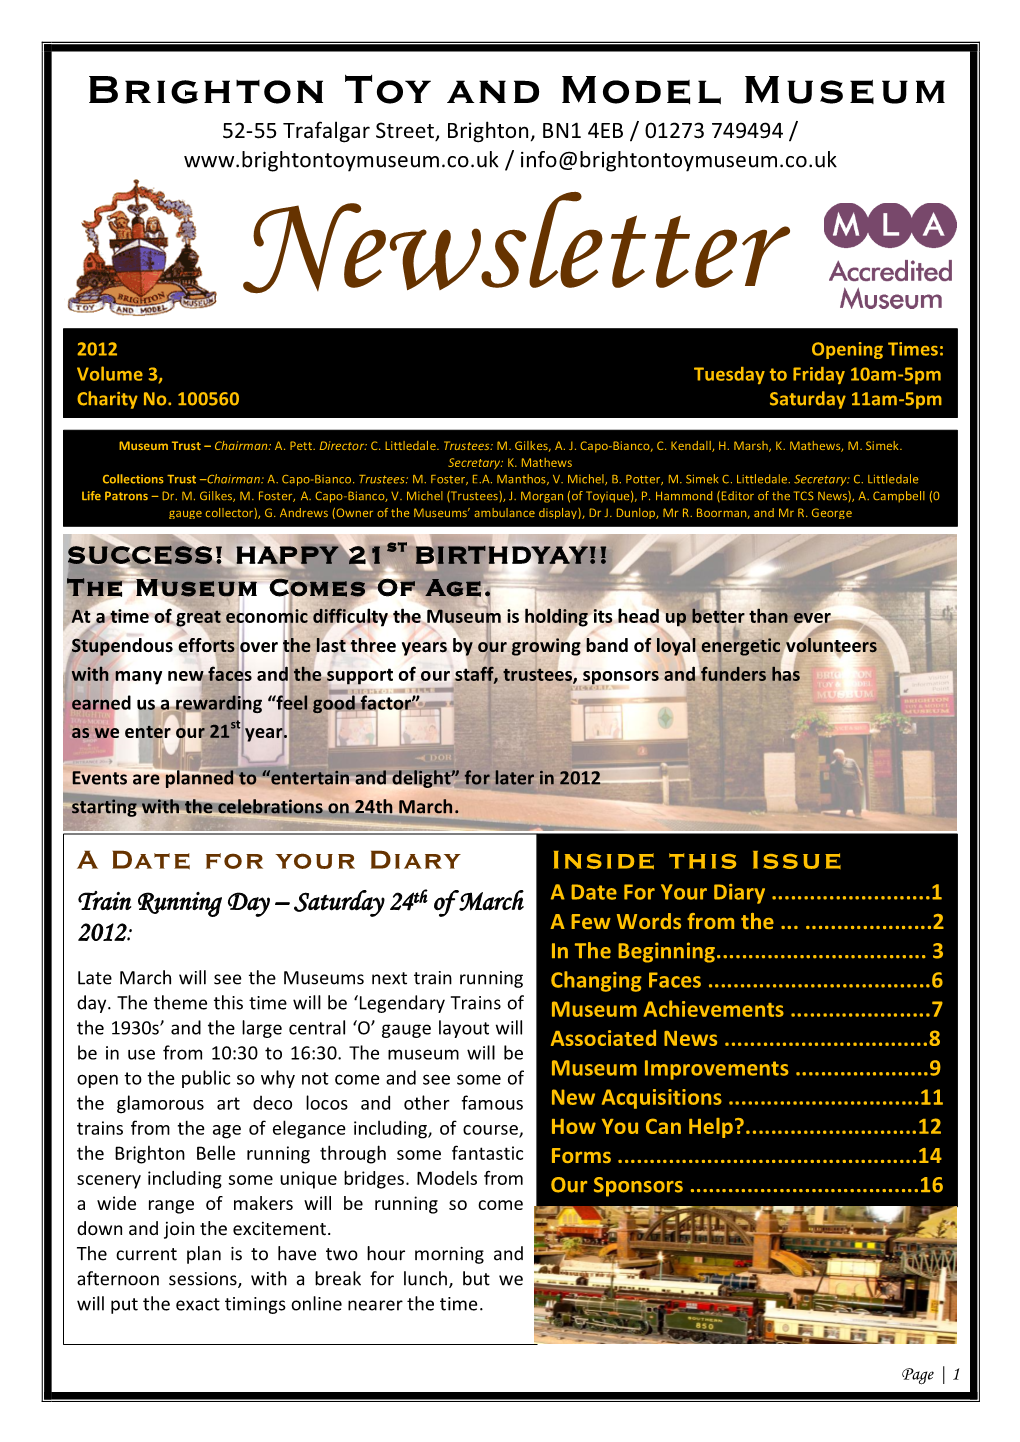 Newsletter, 2012, Brighton Toy and Model Museum